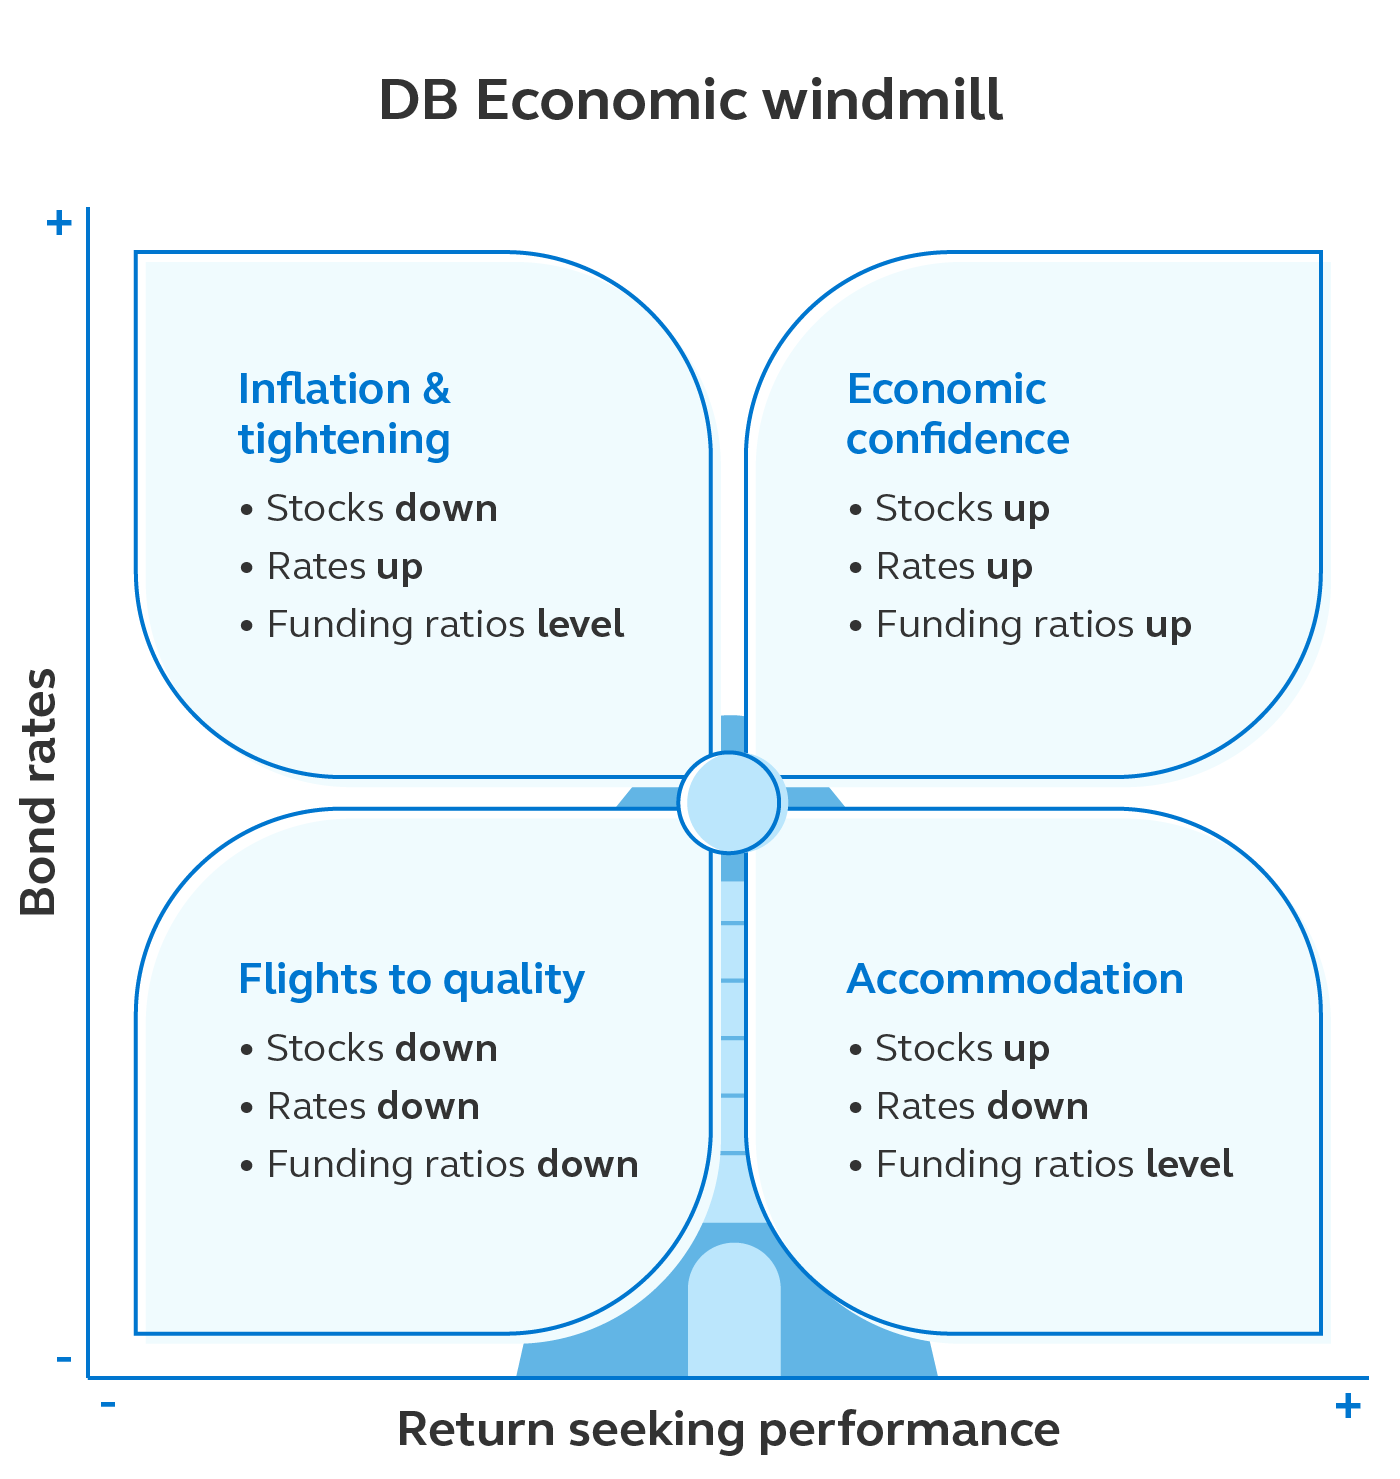 Graphic showing the four economic phases of defined benefit plans: accommodation, flight to quality, inflation and tightening, and economic confidence.